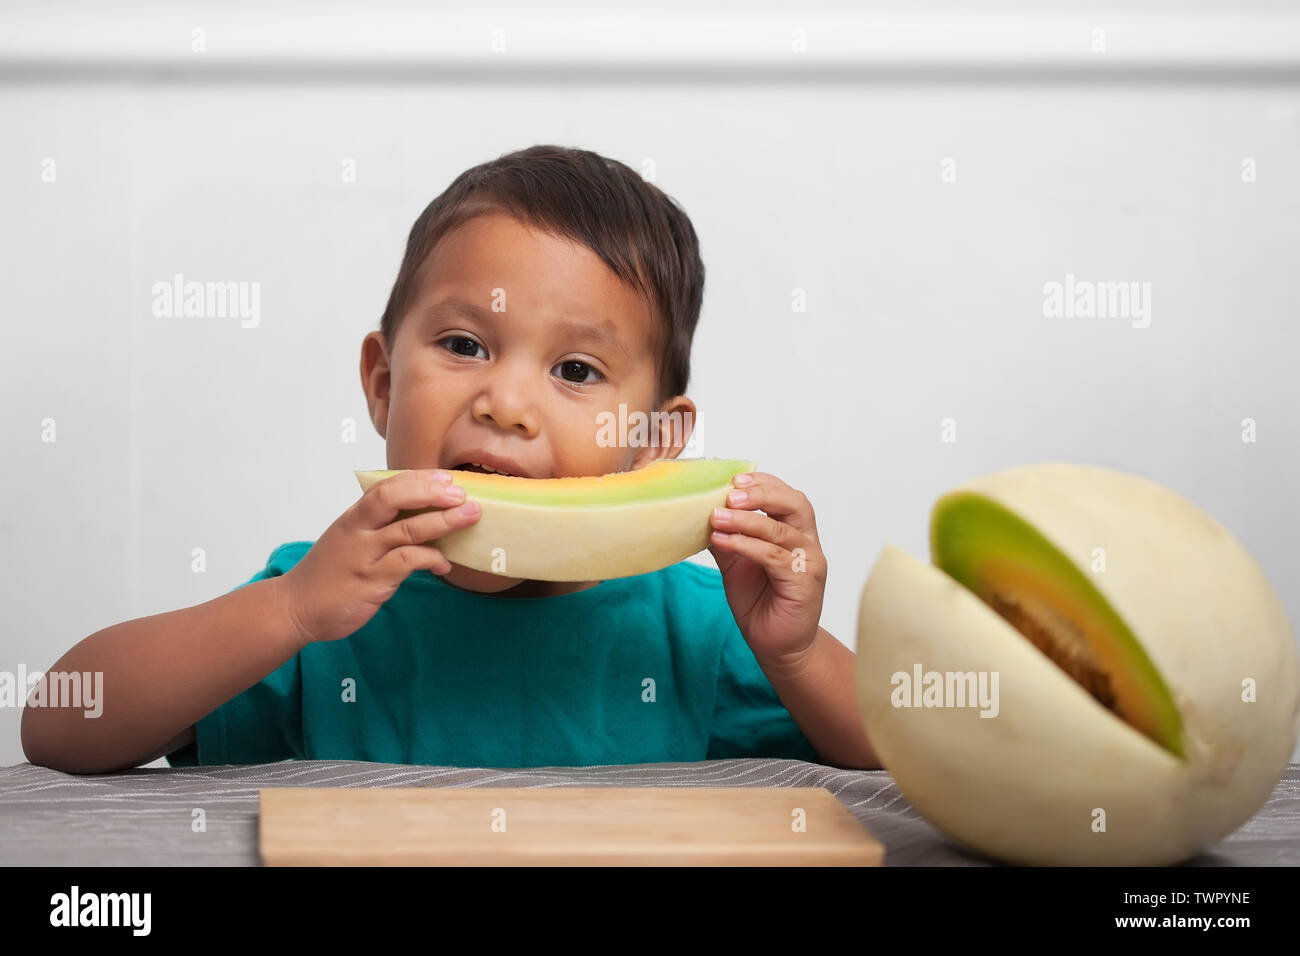 A child eating a slice of fresh honeymelon fruit on his own and enjoying a healthy alternative to processed foods. Stock Photo